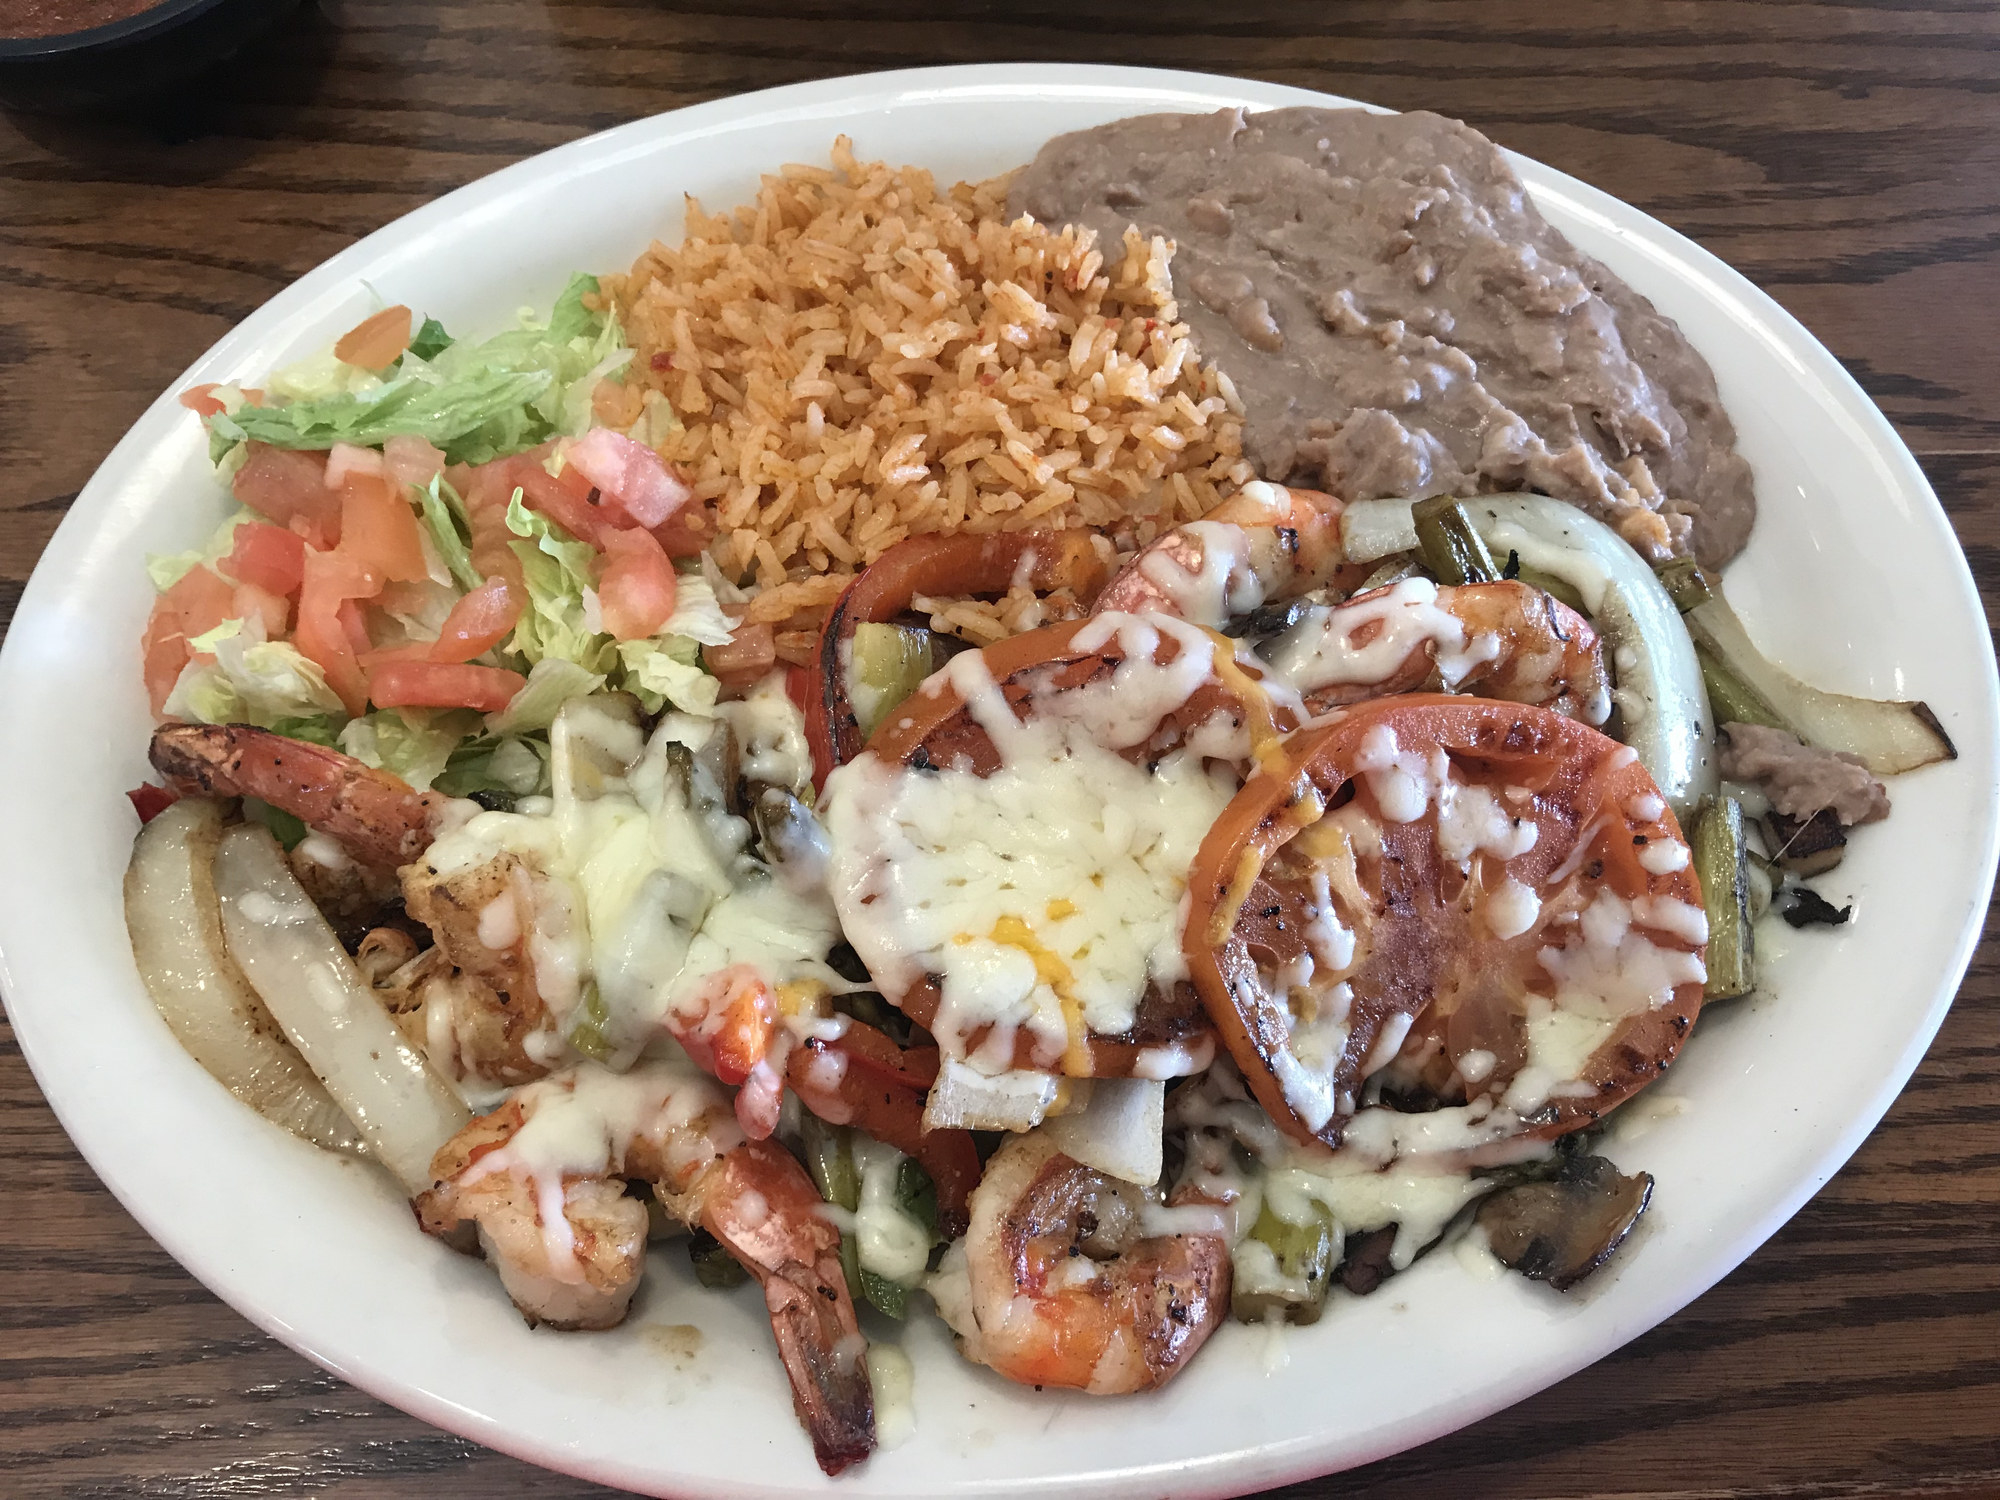 A plate of Tex Mex food